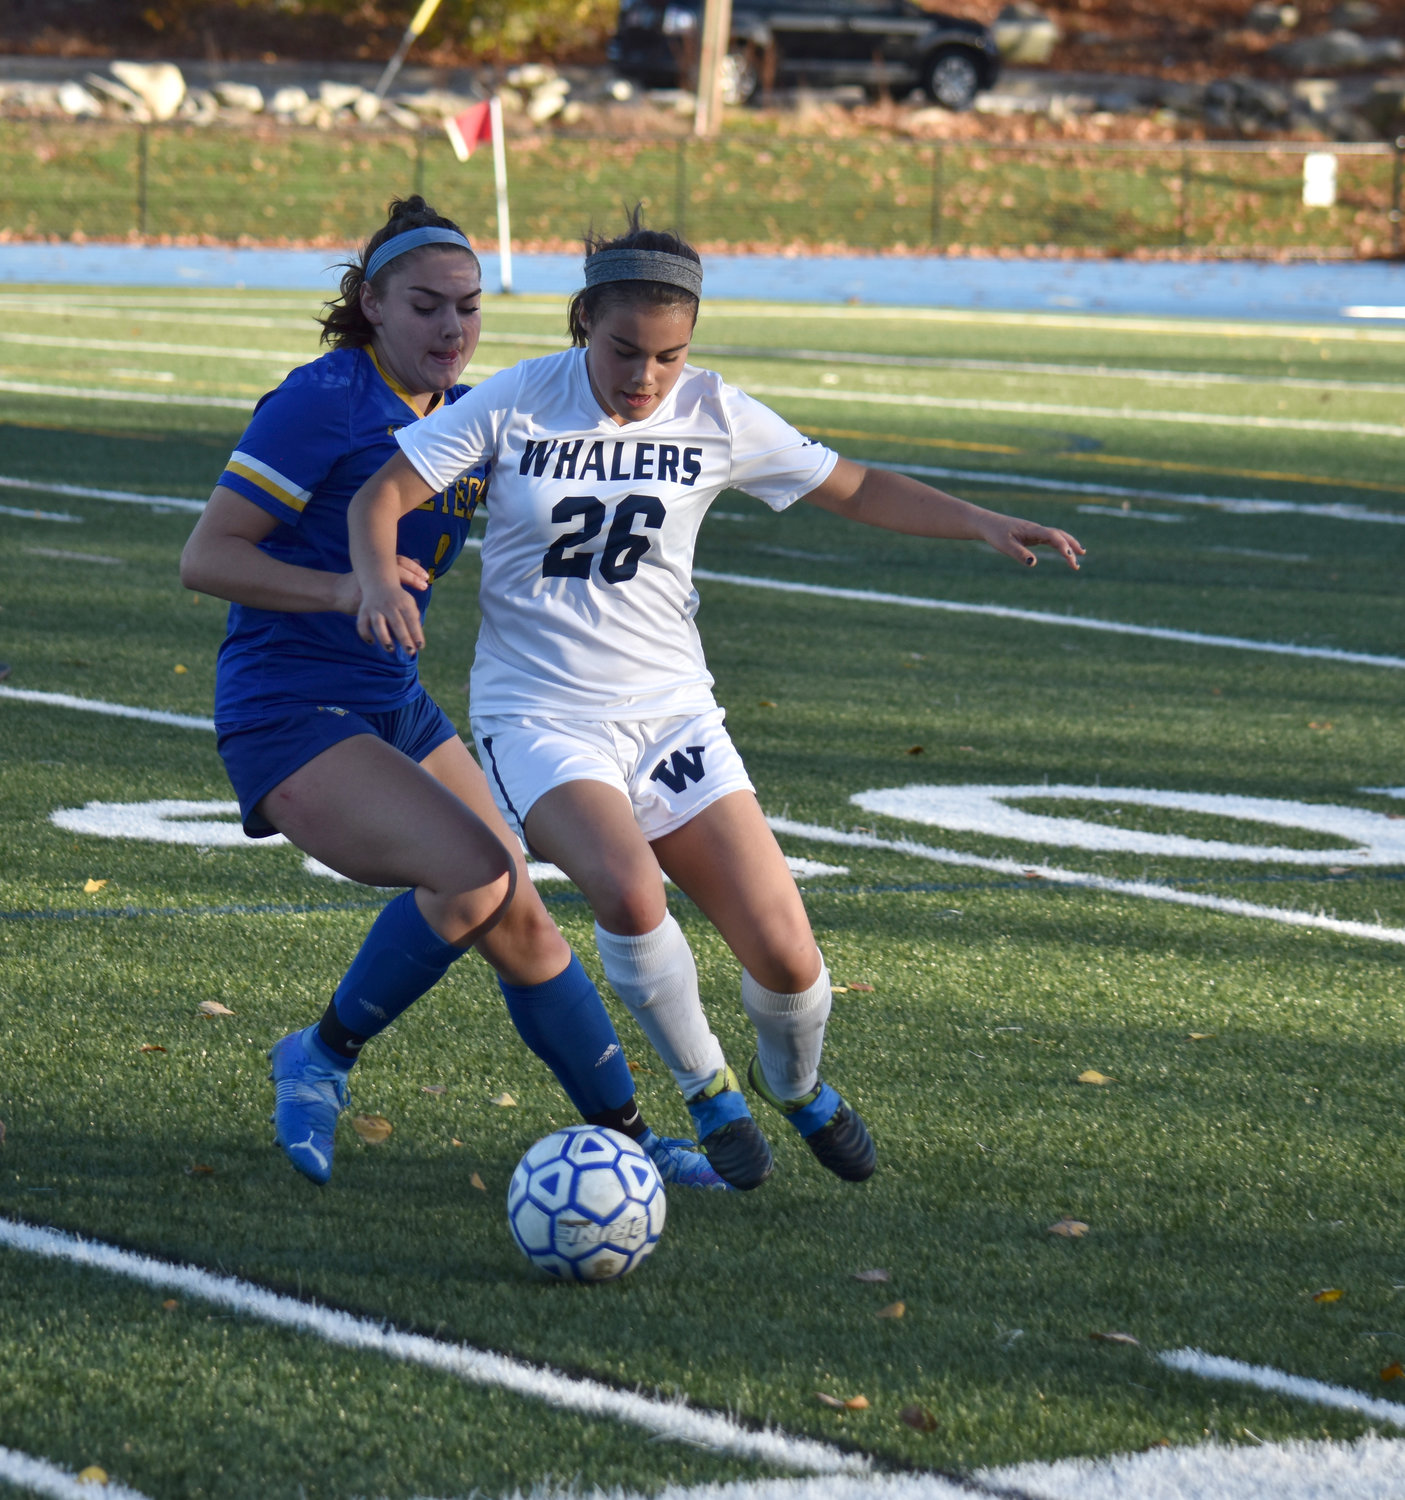 Taylor Bistany knocks the ball away from an Assabet Valley player.